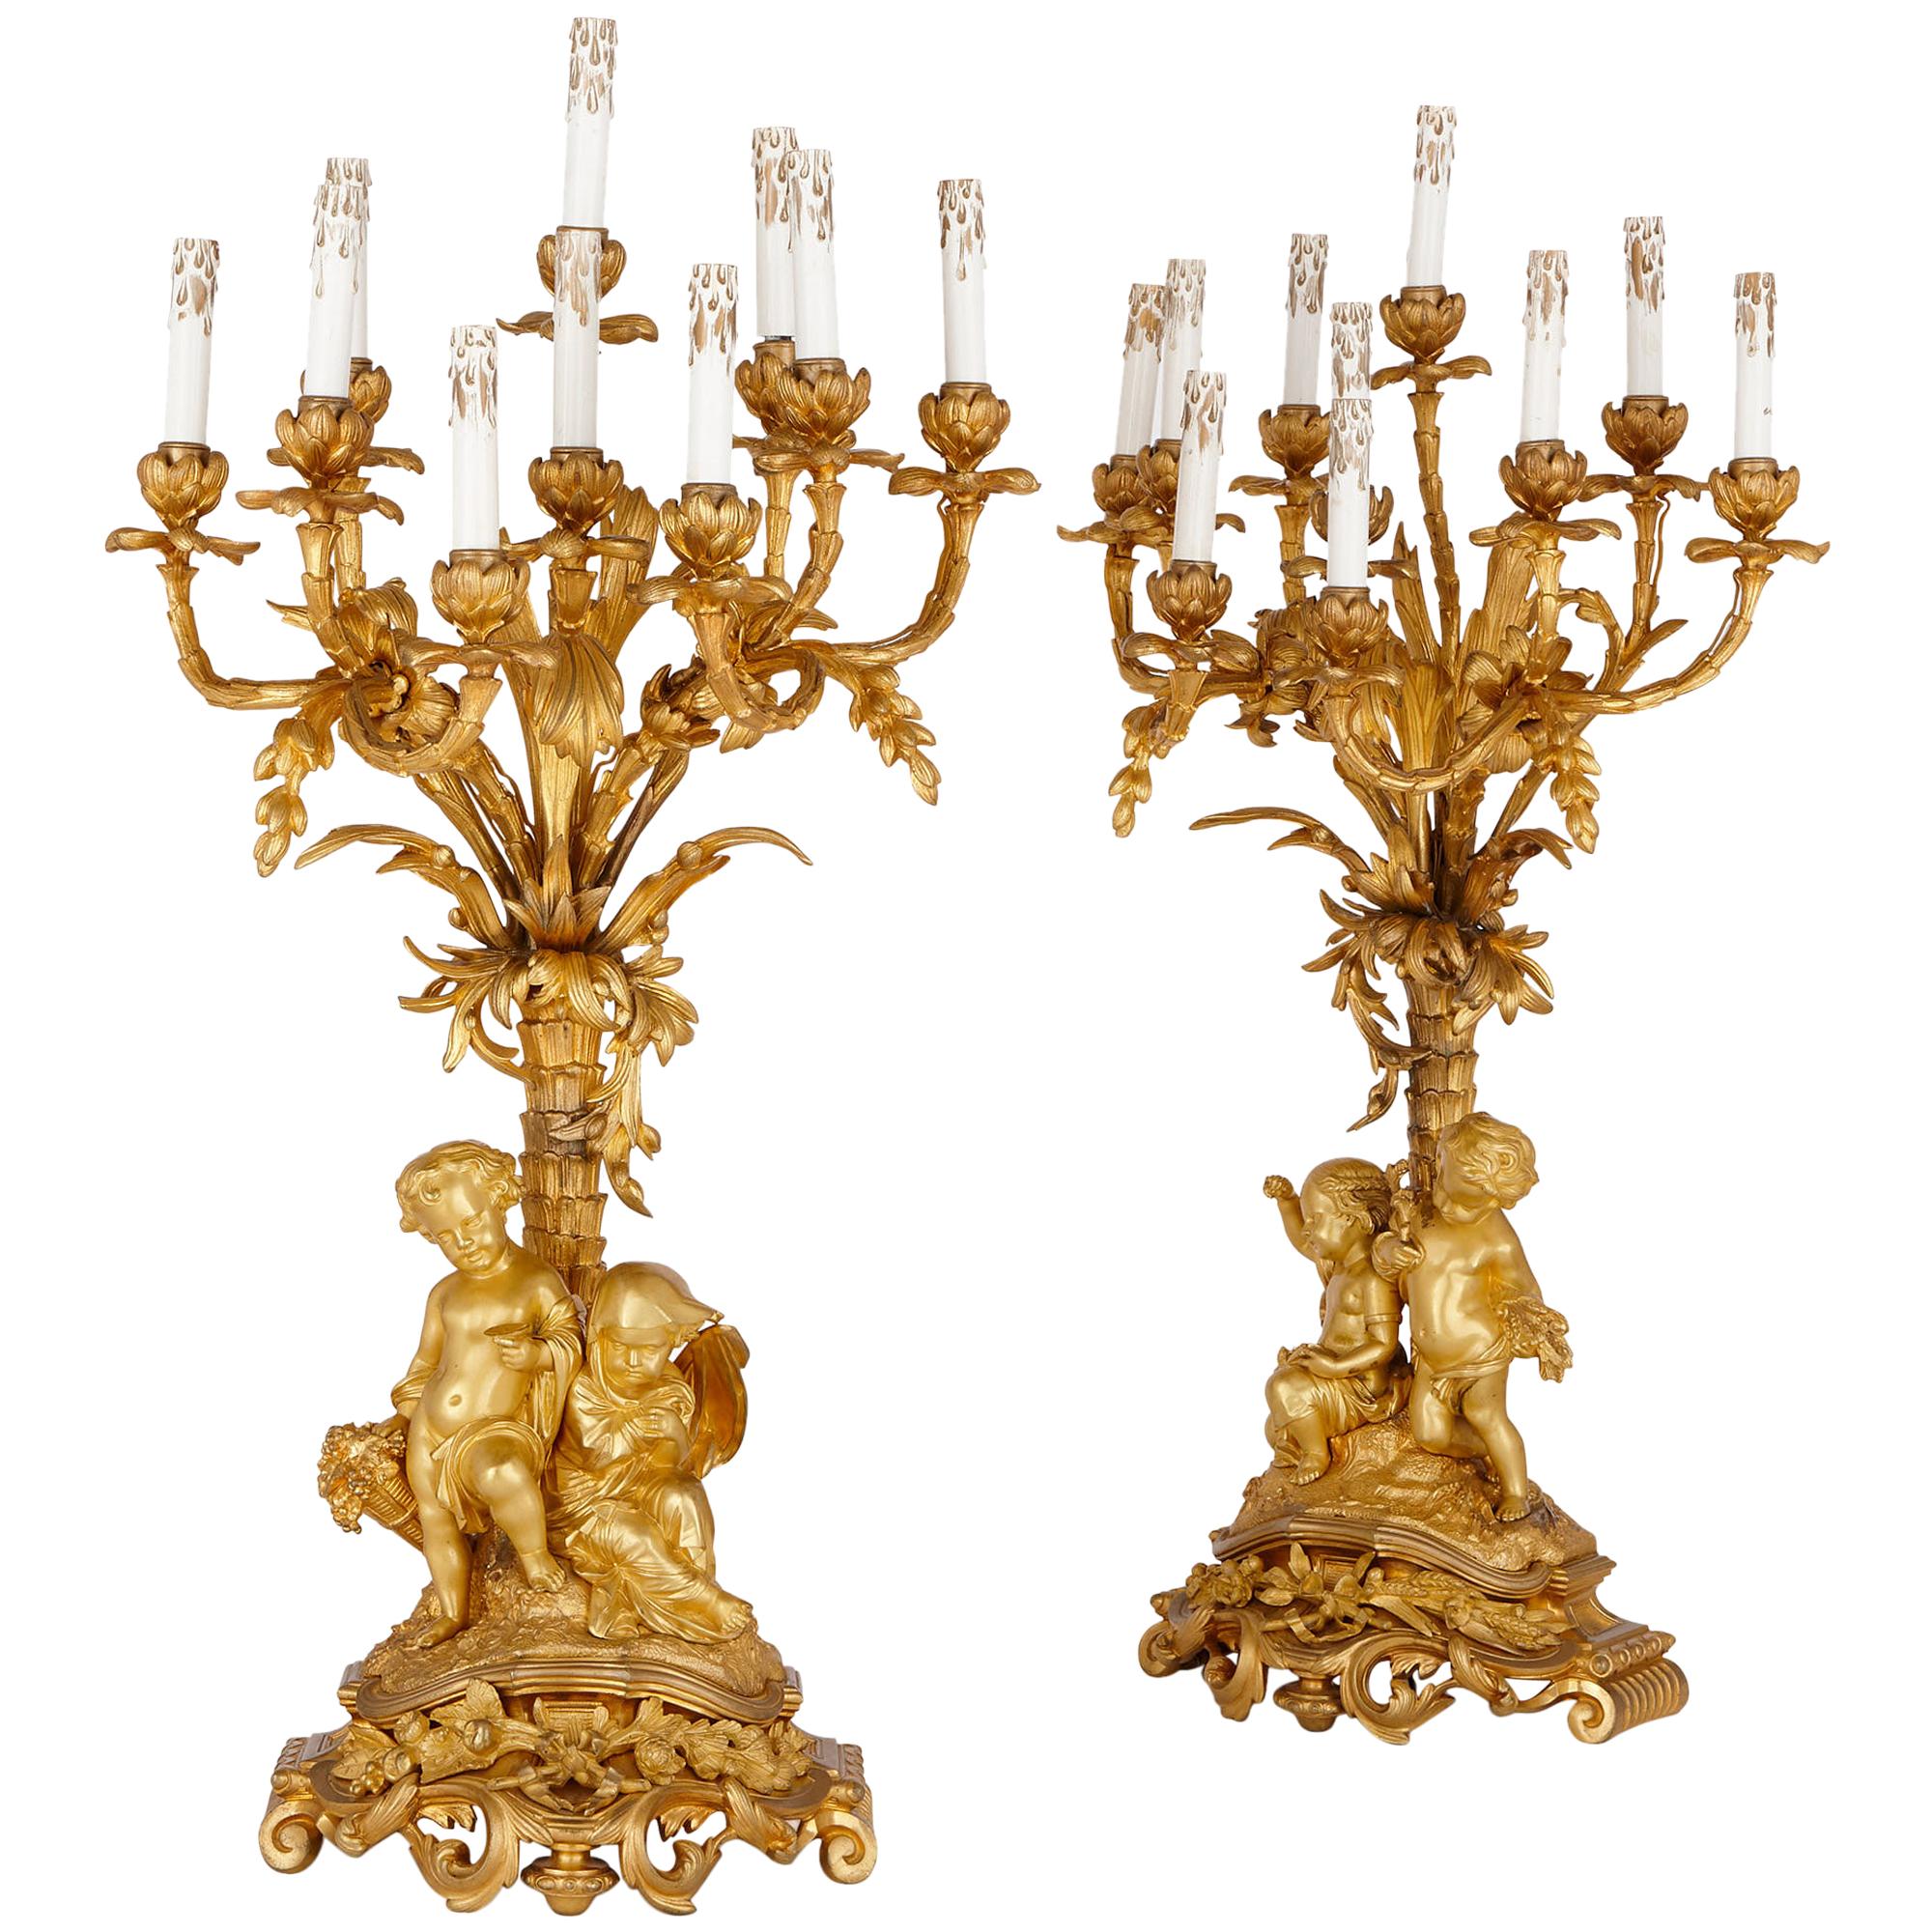 Two Napoleon III Period Gilt Bronze Candelabra by Picard